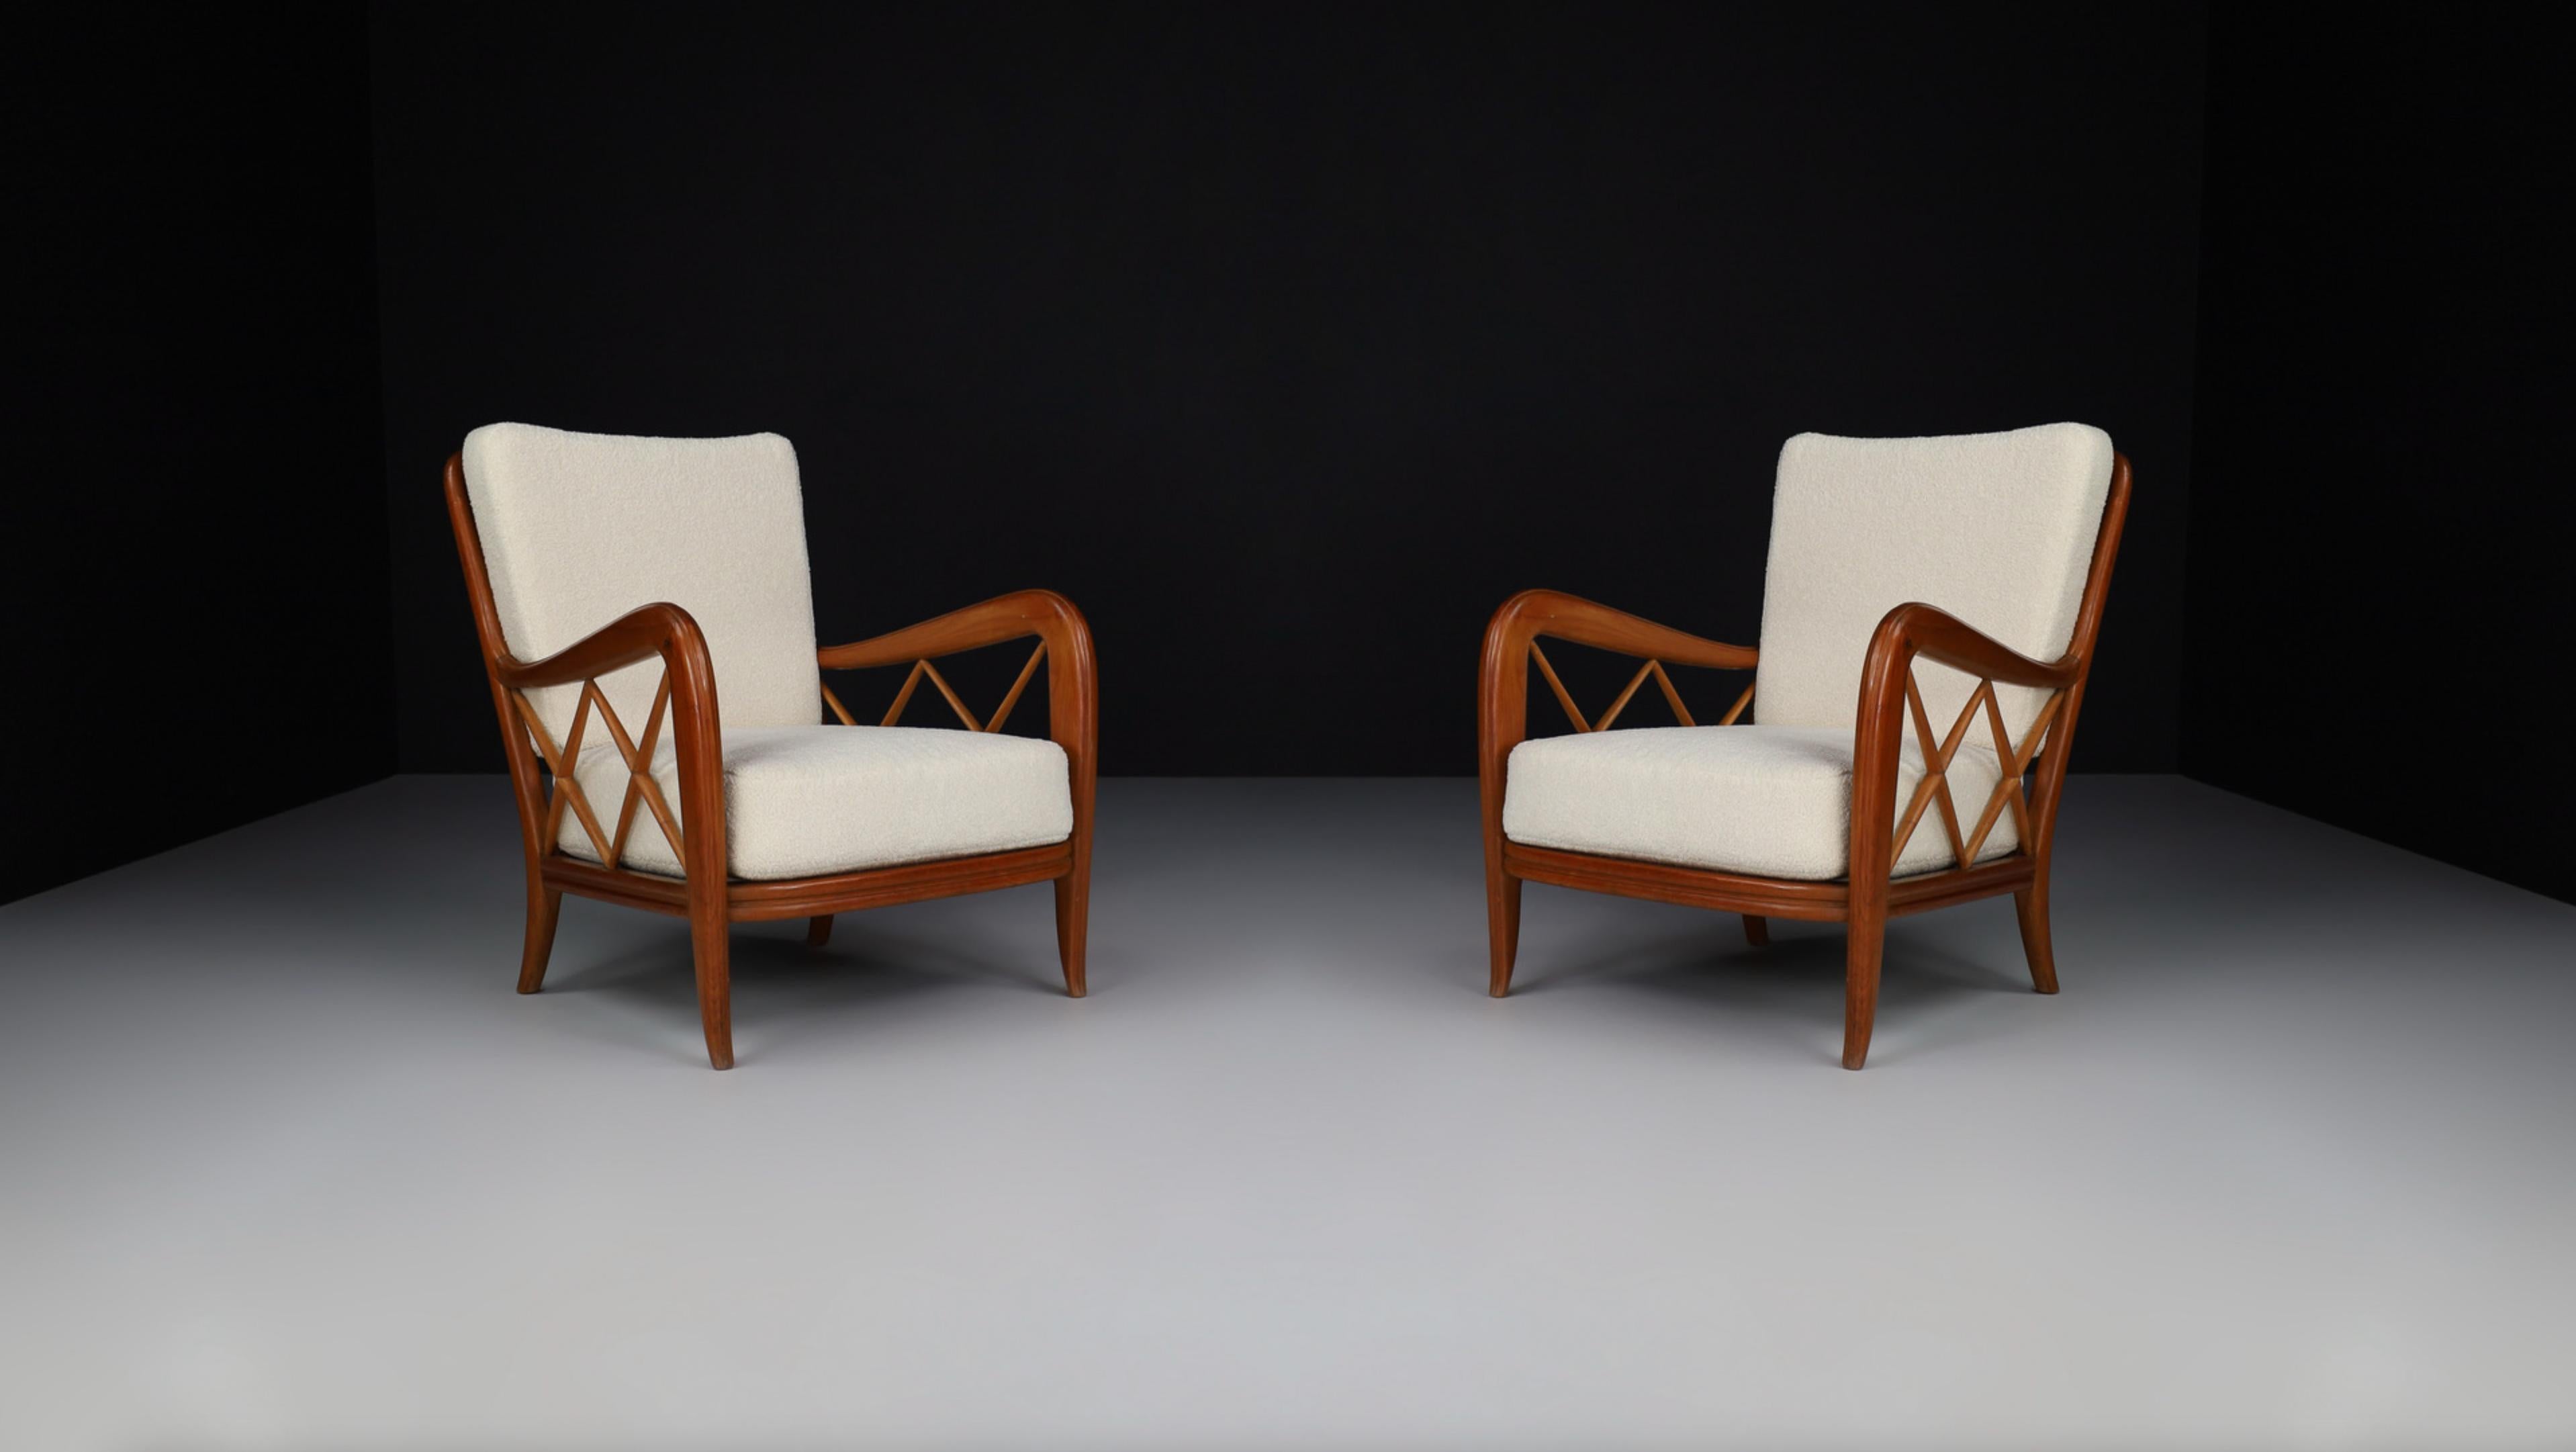 Paolo Buffa walnut and teddy fabric armchairs, Italy 1950s 

Italian pair of four lounge chairs made of hand-carved  walnut and re-upholstered teddy fabric designed by Paolo Buffa in Italy 1950s. These four armchairs would be an eye-catching